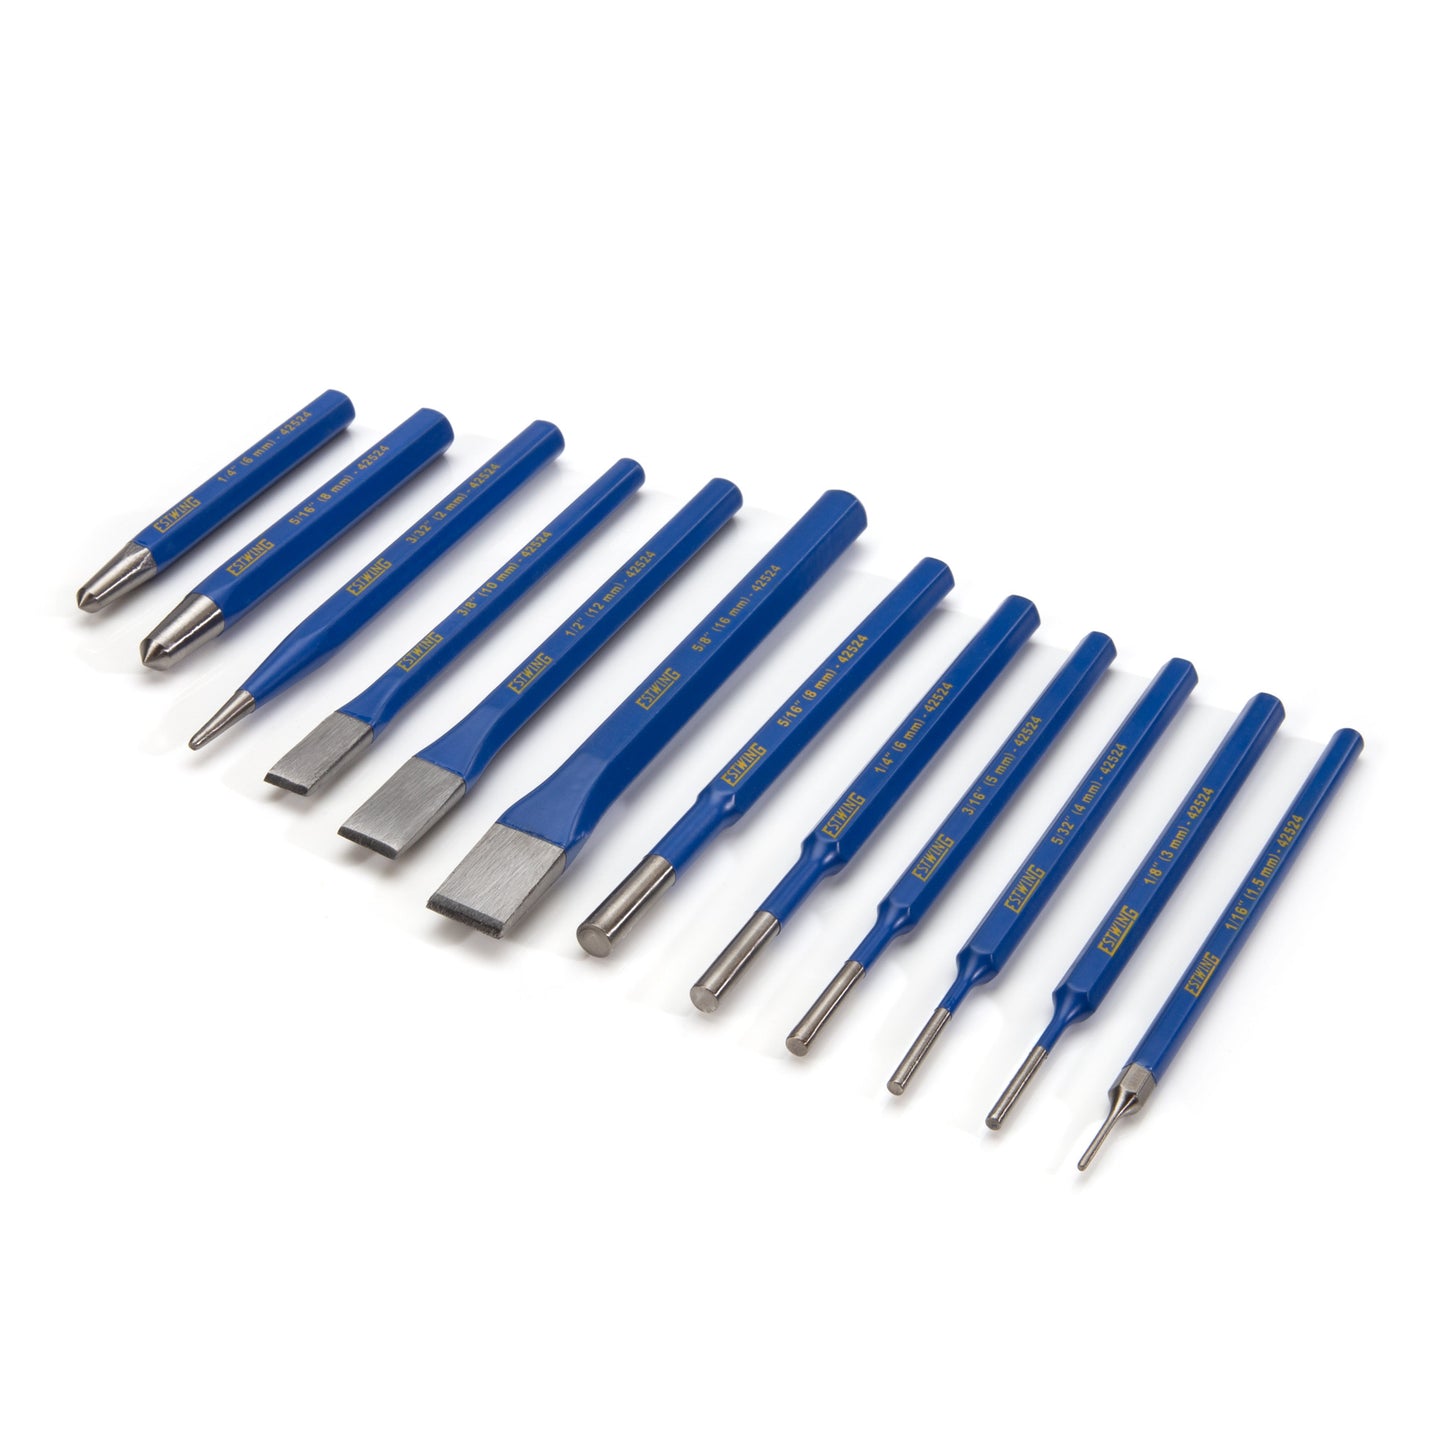 12-Piece Cold Chisel, Pin, Center and Starter Punch Set